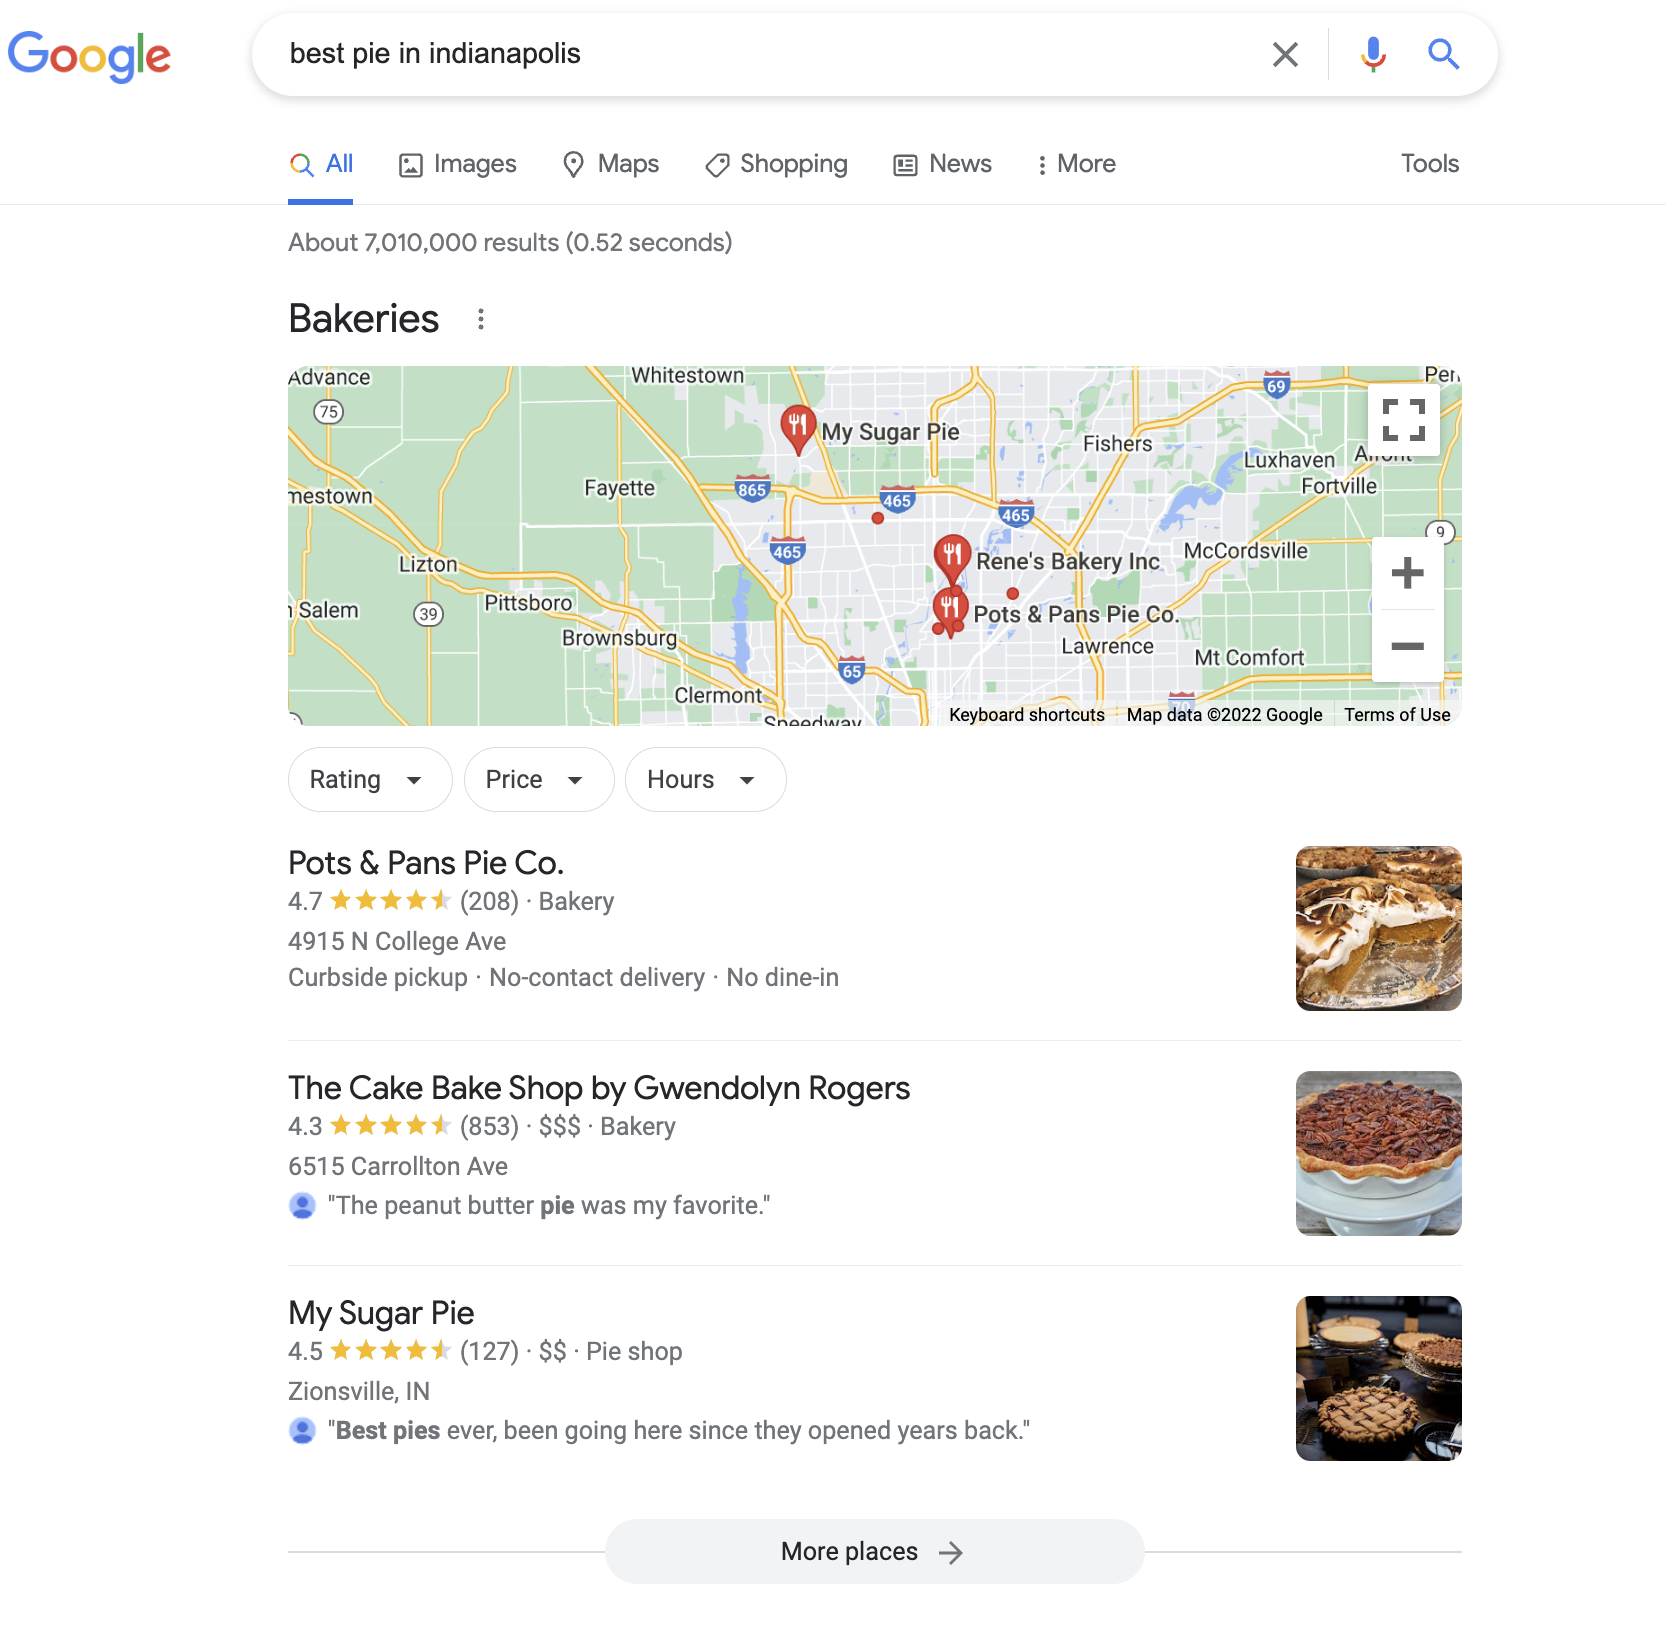 Screenshot of Google Local Pack listing for "best pie in Indianapolis."